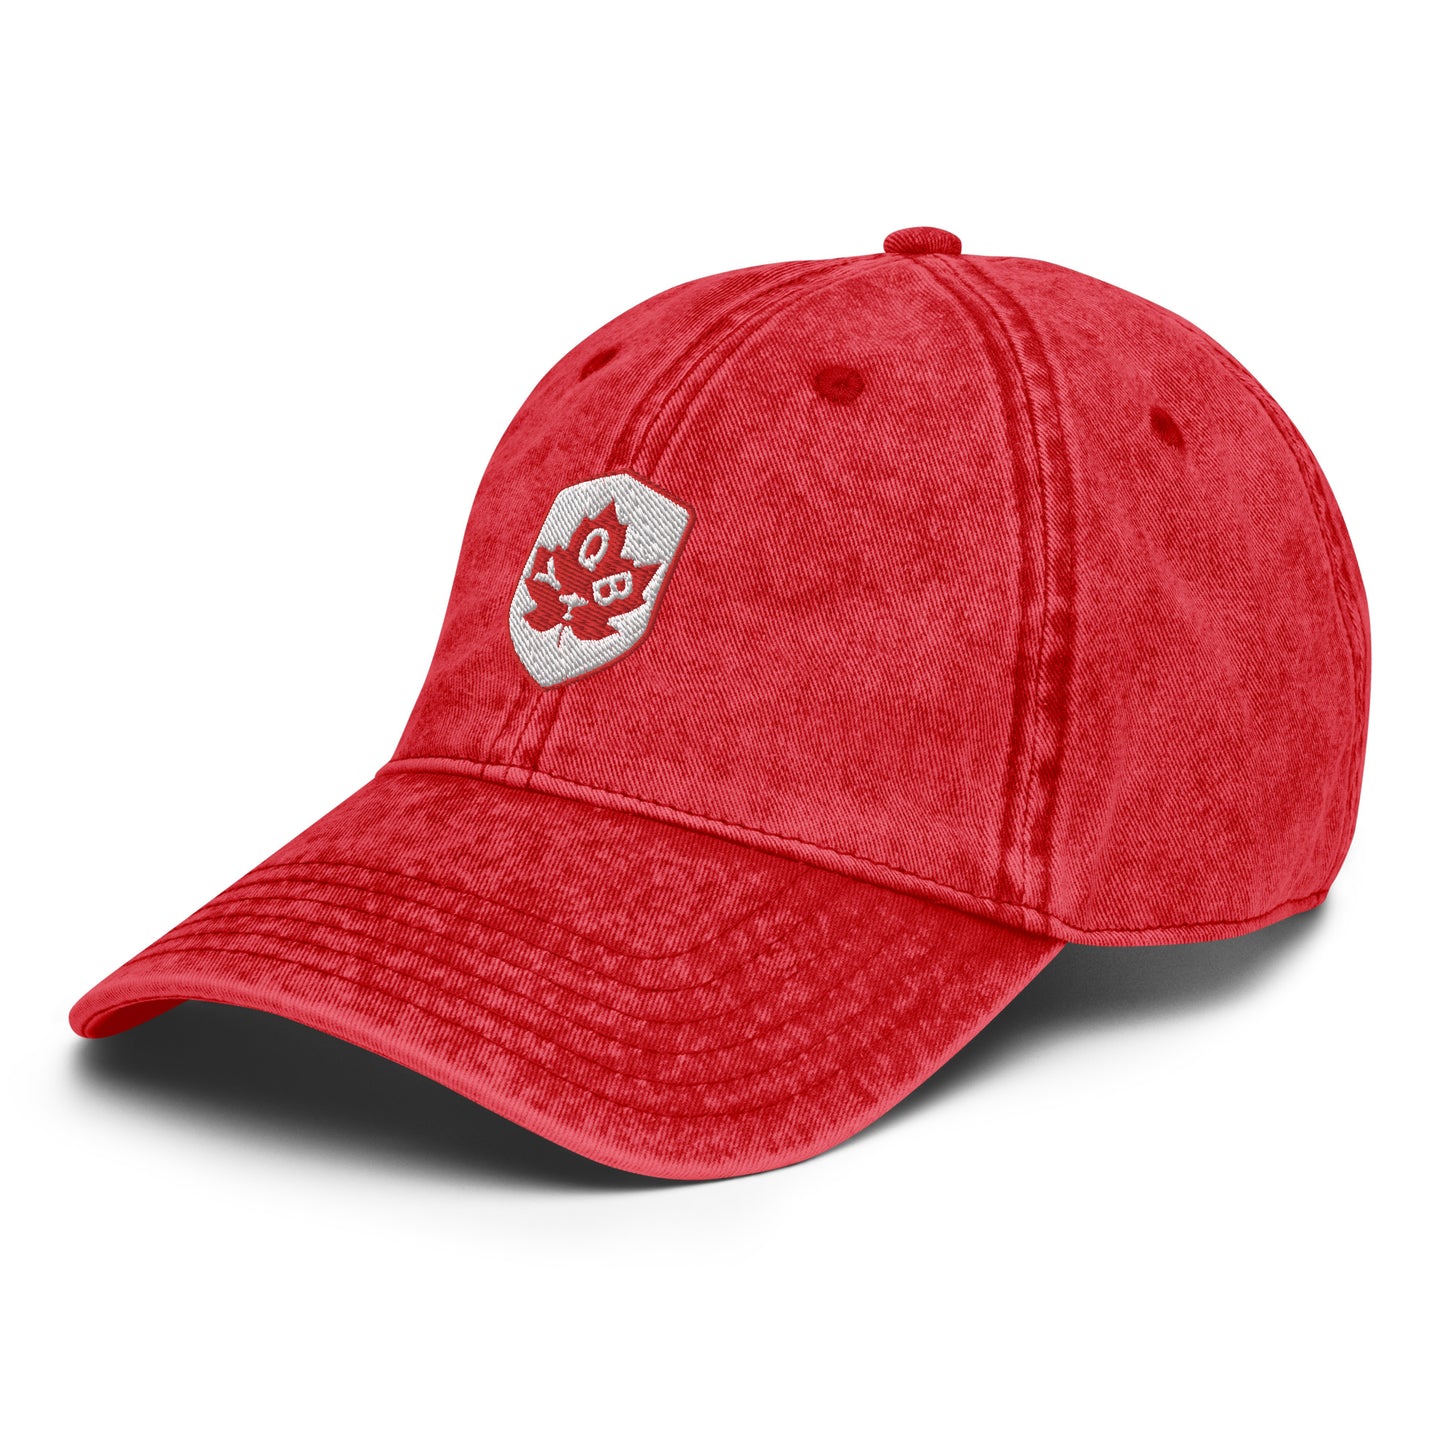 Maple Leaf Twill Cap - Red/White • YQB Quebec City • YHM Designs - Image 20